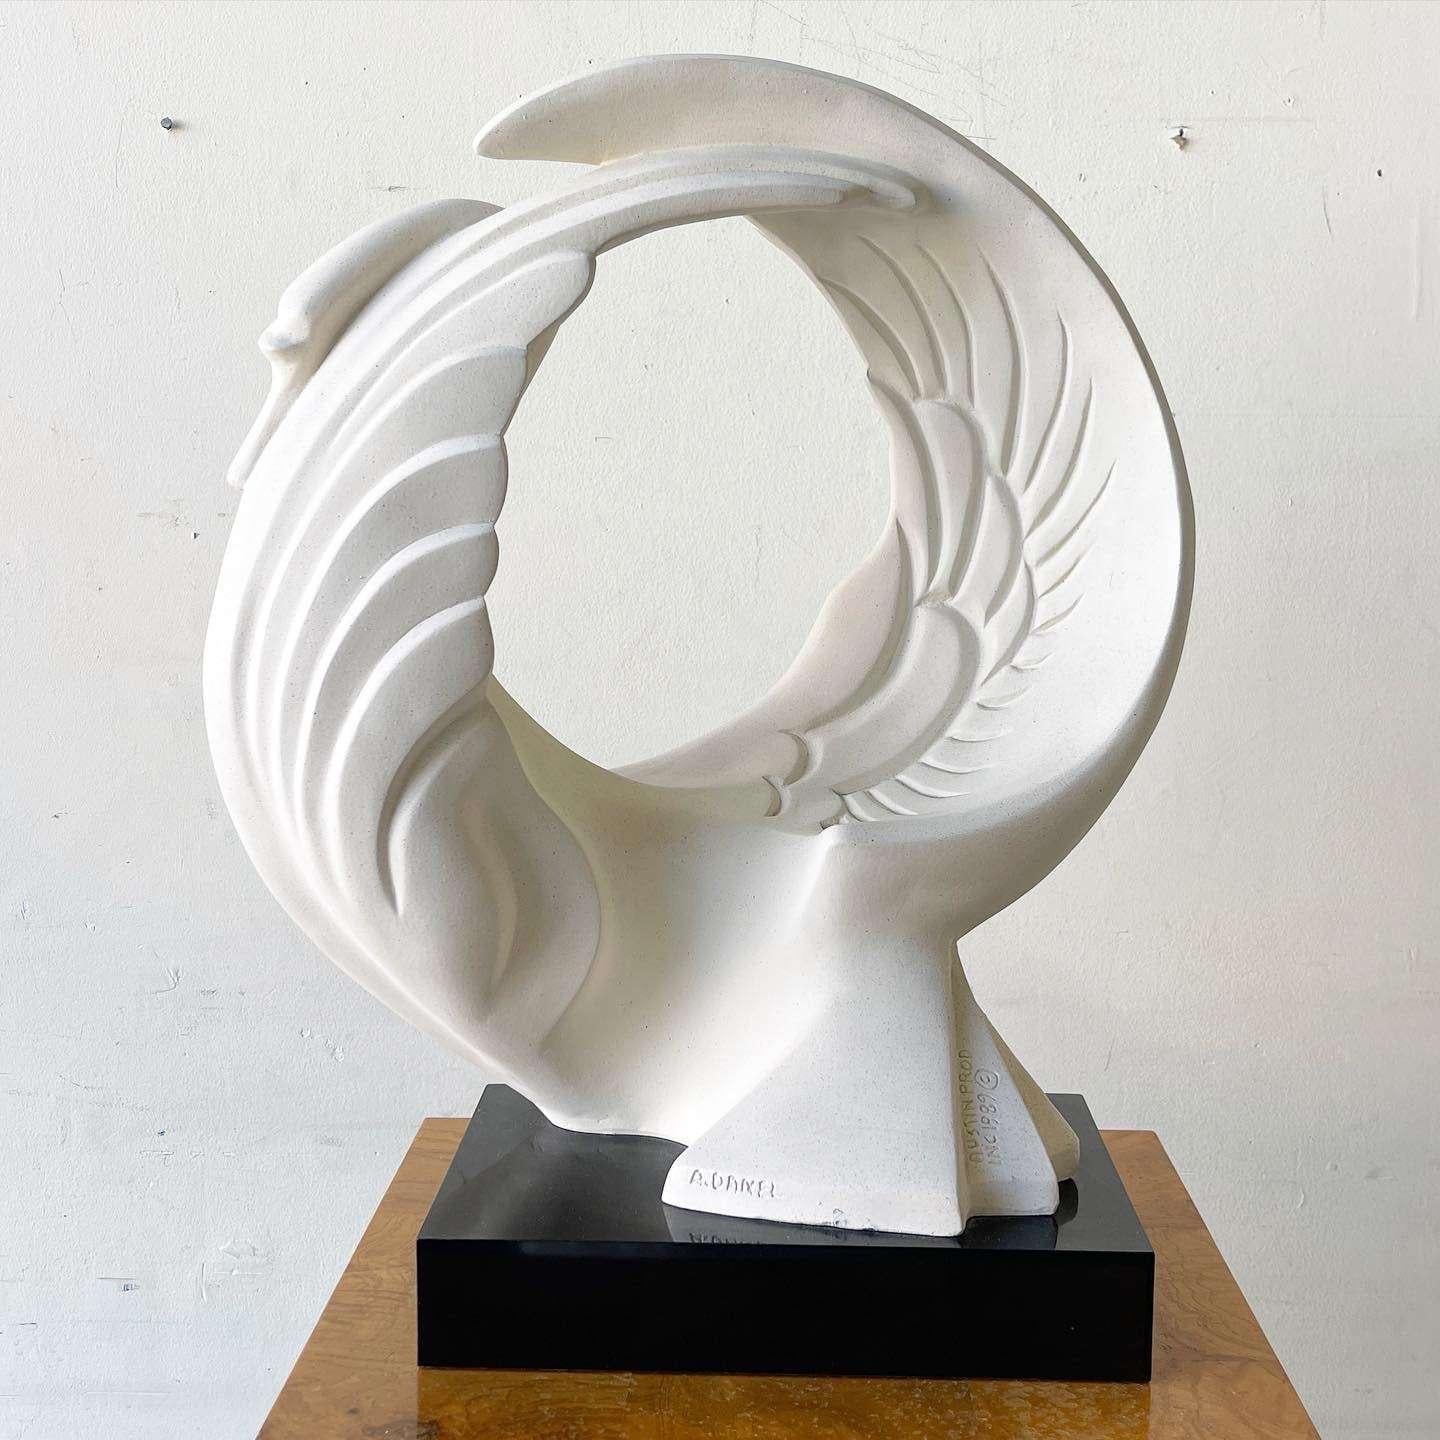 One of the Austin Productions rare items, this large curled swan is mounted to a black laminate base. Produced in limited quantities in 1989 and made by artist A. Danel.
